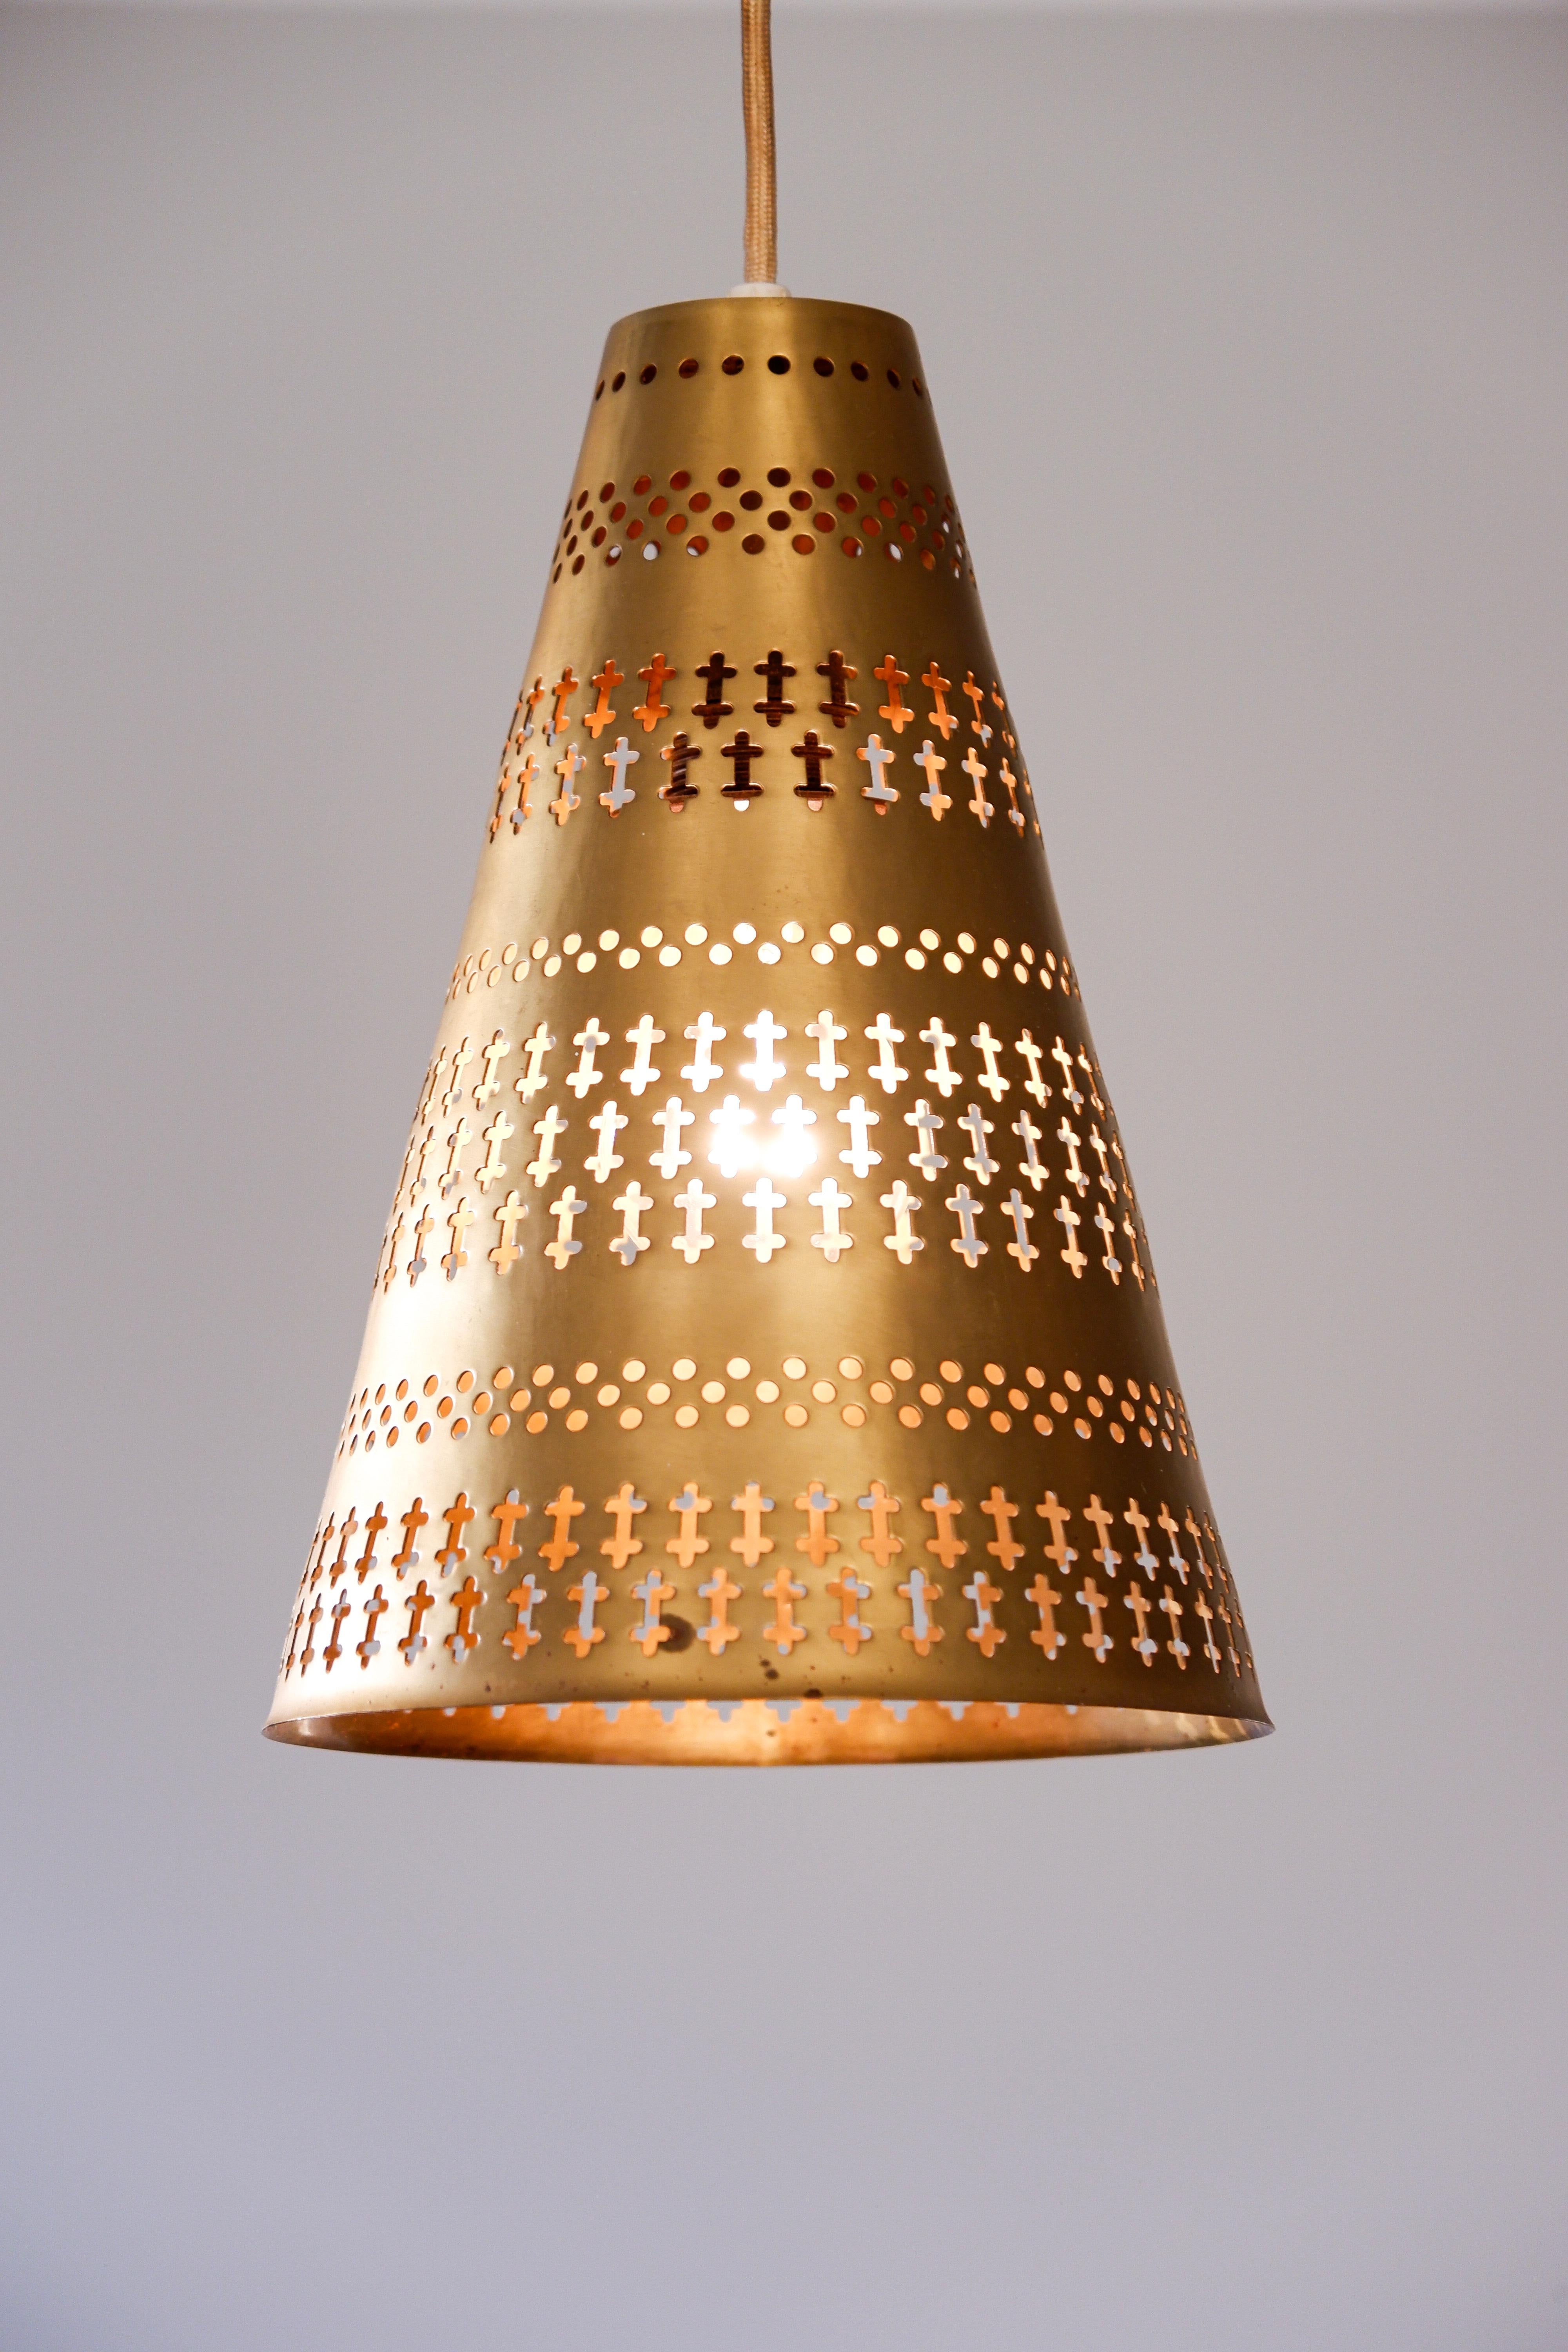 Pair of Hans Bergström perforated light designed by the artist in the 60's and produced by Ateljé Lyktan in the same time. The lamps are made in solide perforated brass that give a really poetic and impressive lights when there are lighted up. The